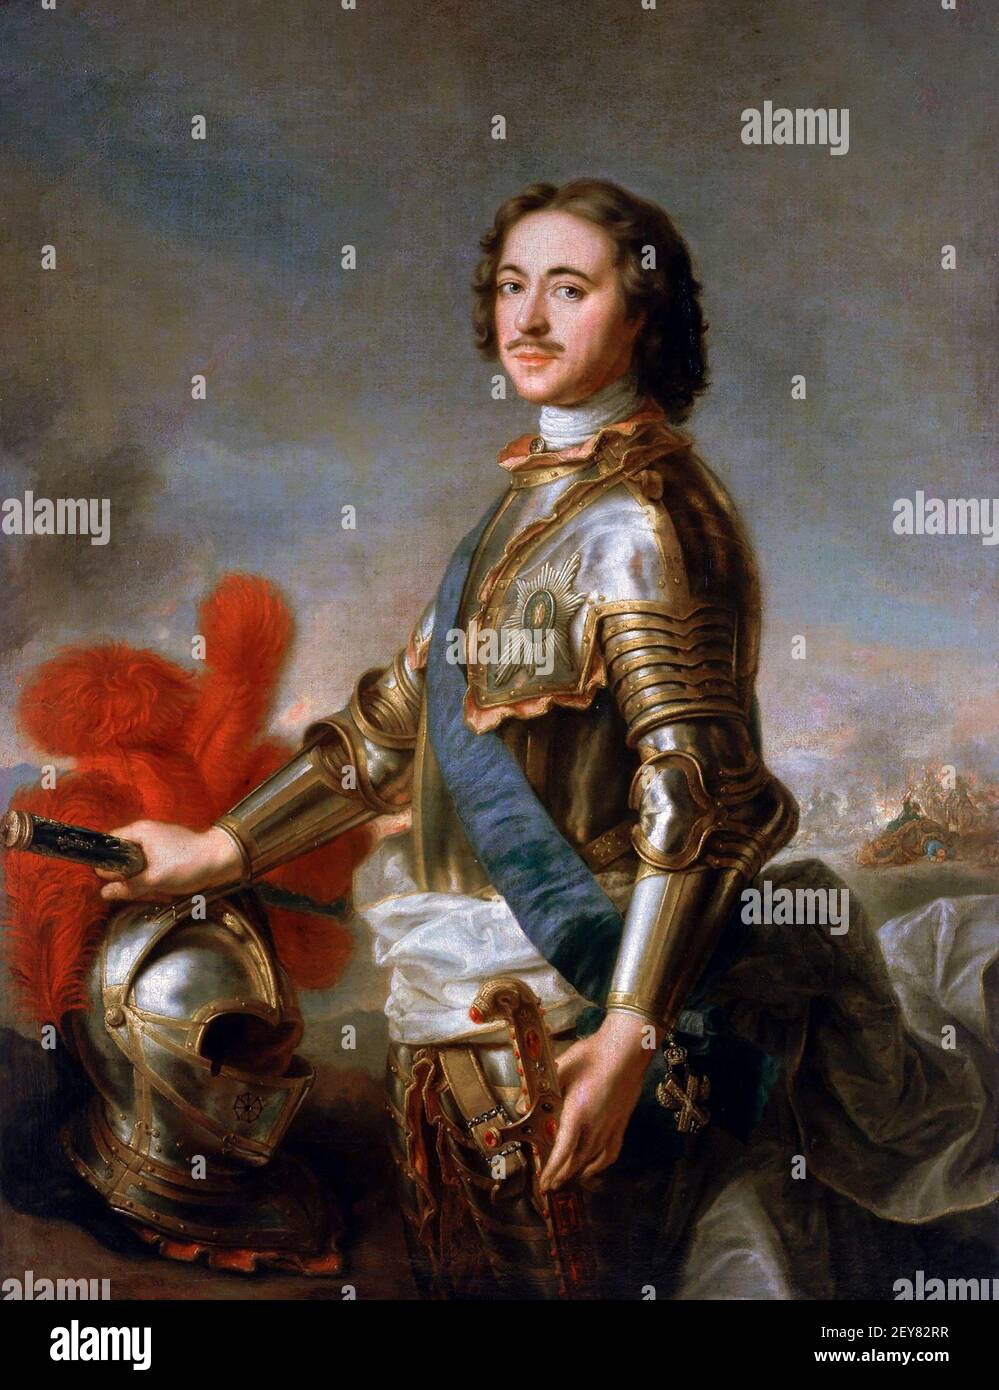 Peter the Great. Portrait of Tsar Peter I of Russia (1672-1725), attributed to Jean-Marc Nattier, oil on canvas, 17th century Stock Photo